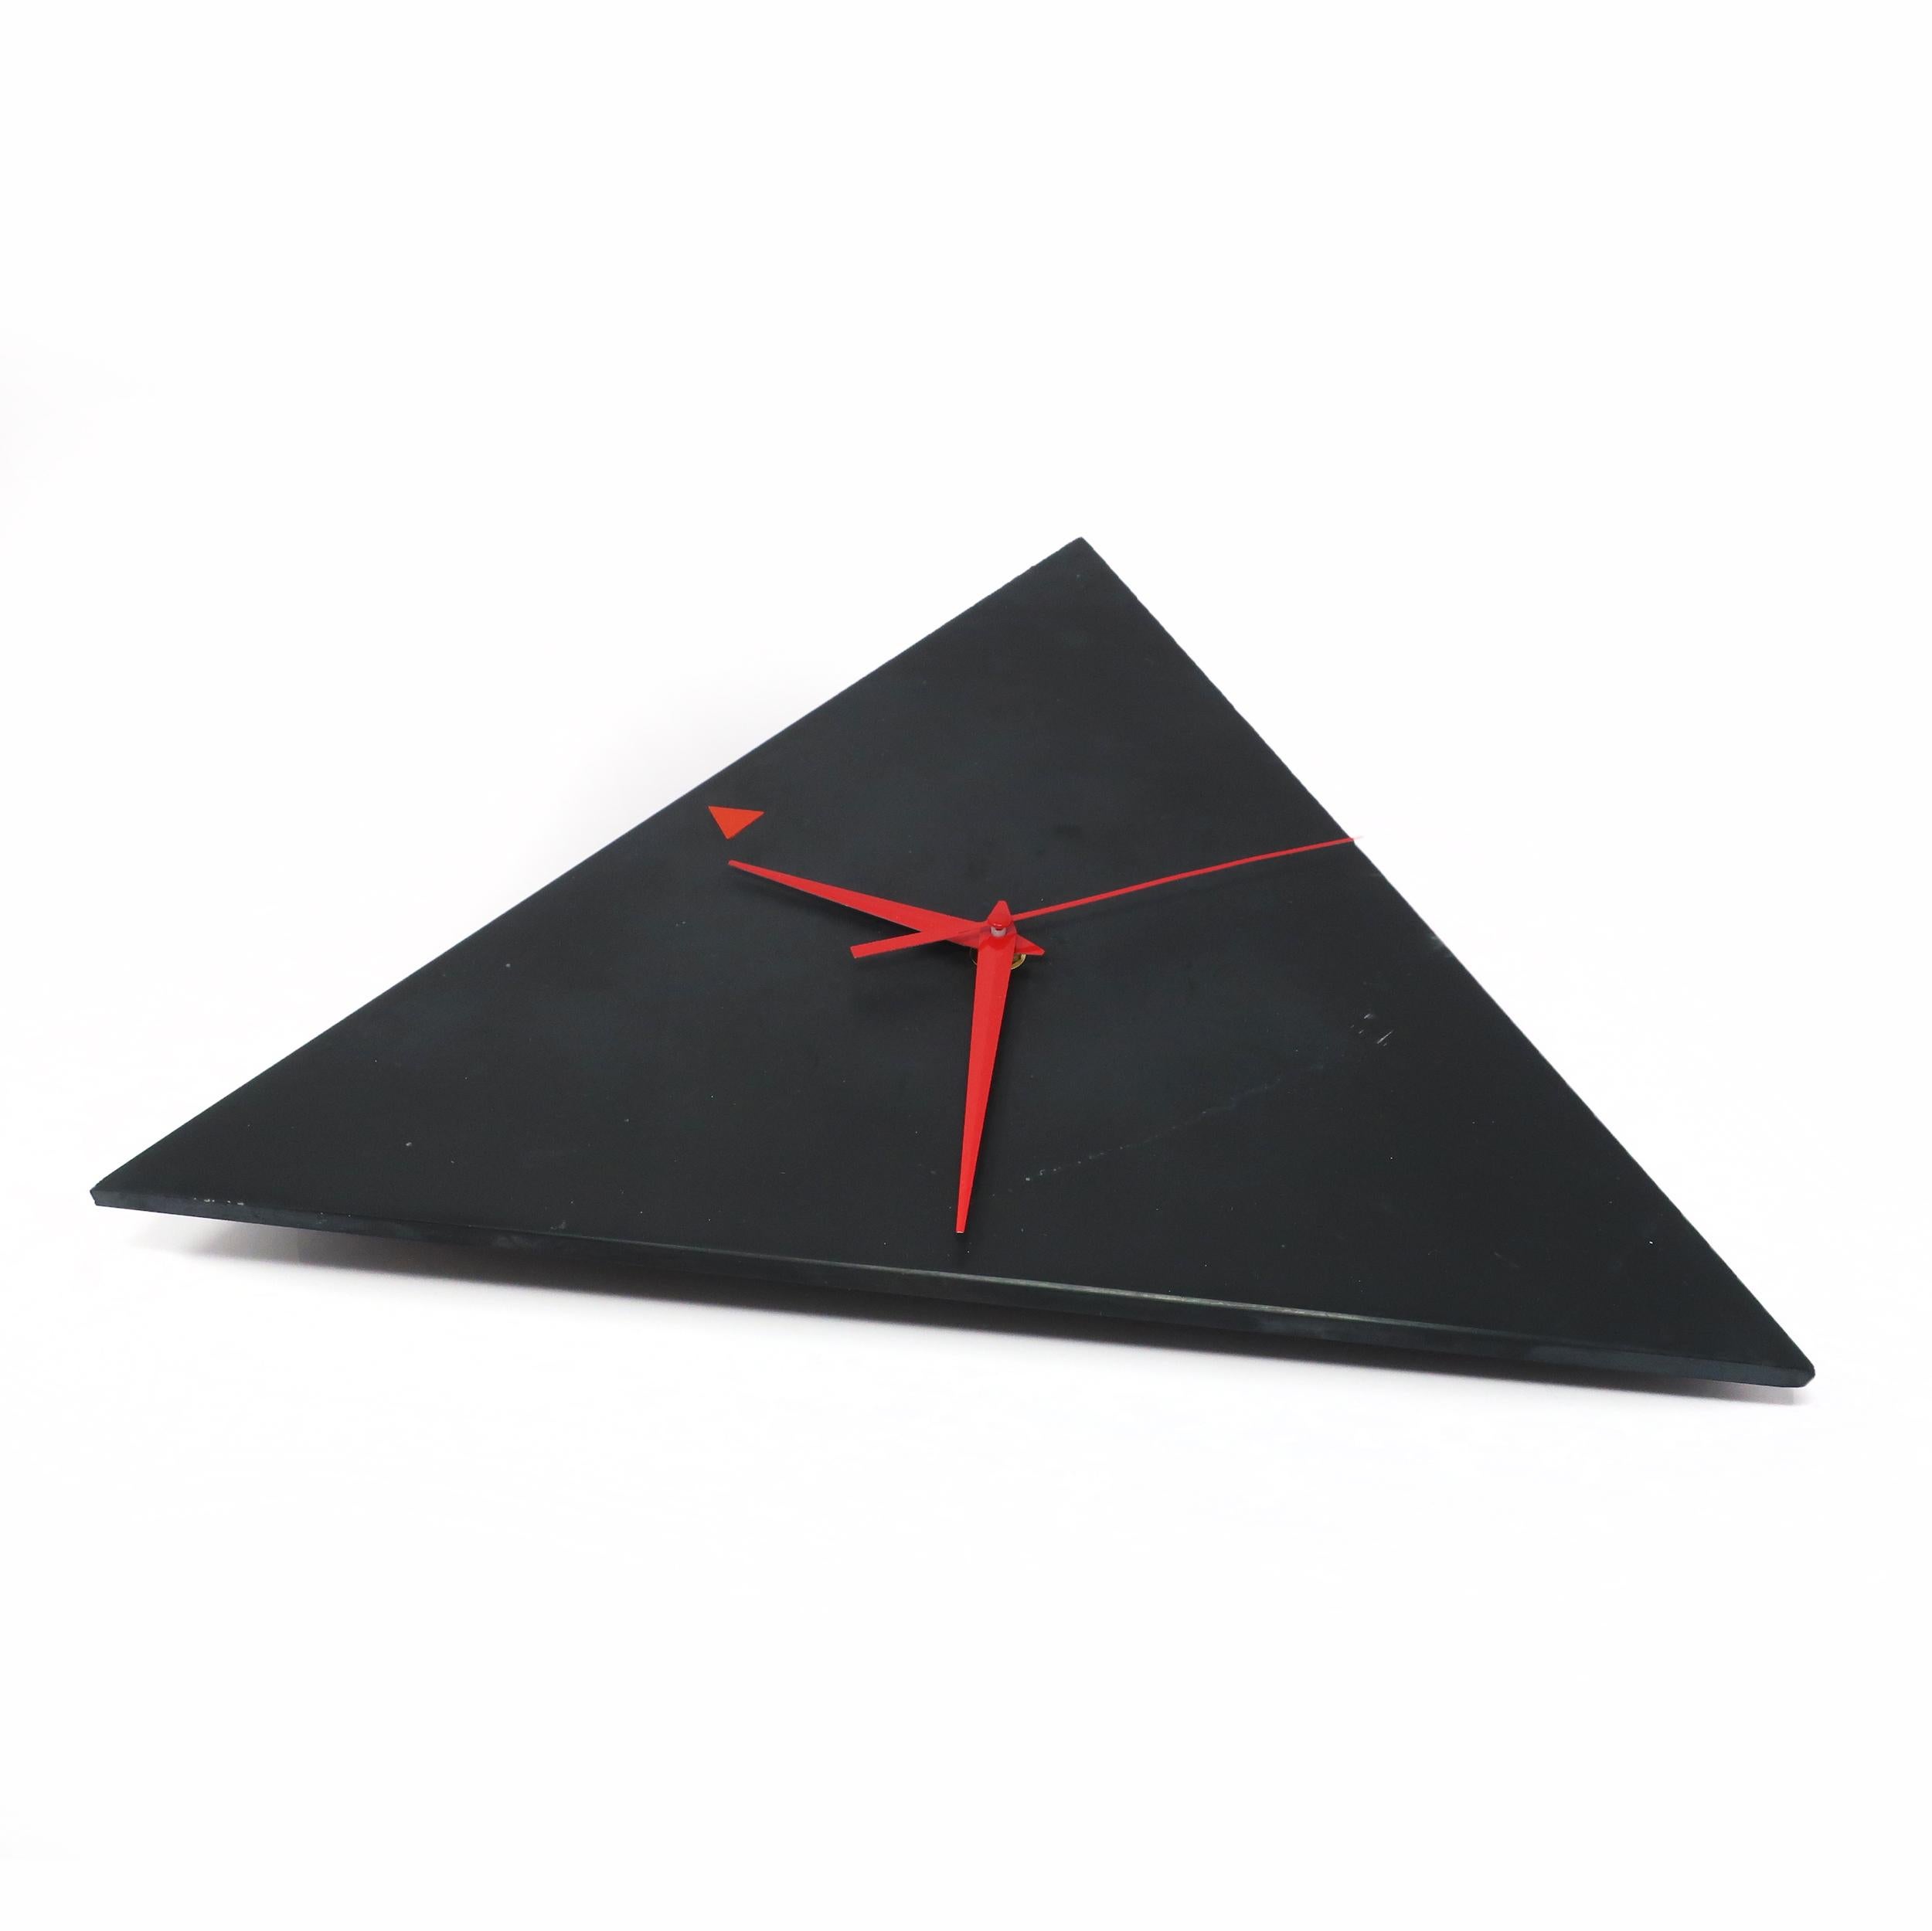 A stunning Italian slate wall clock in the shape of a triangle with red hands and a red triangle at 12 o'clock. Lovely coloring and veining in the slate give it a sophisticated yet natural look.

In good vintage condition. Takes a single AA